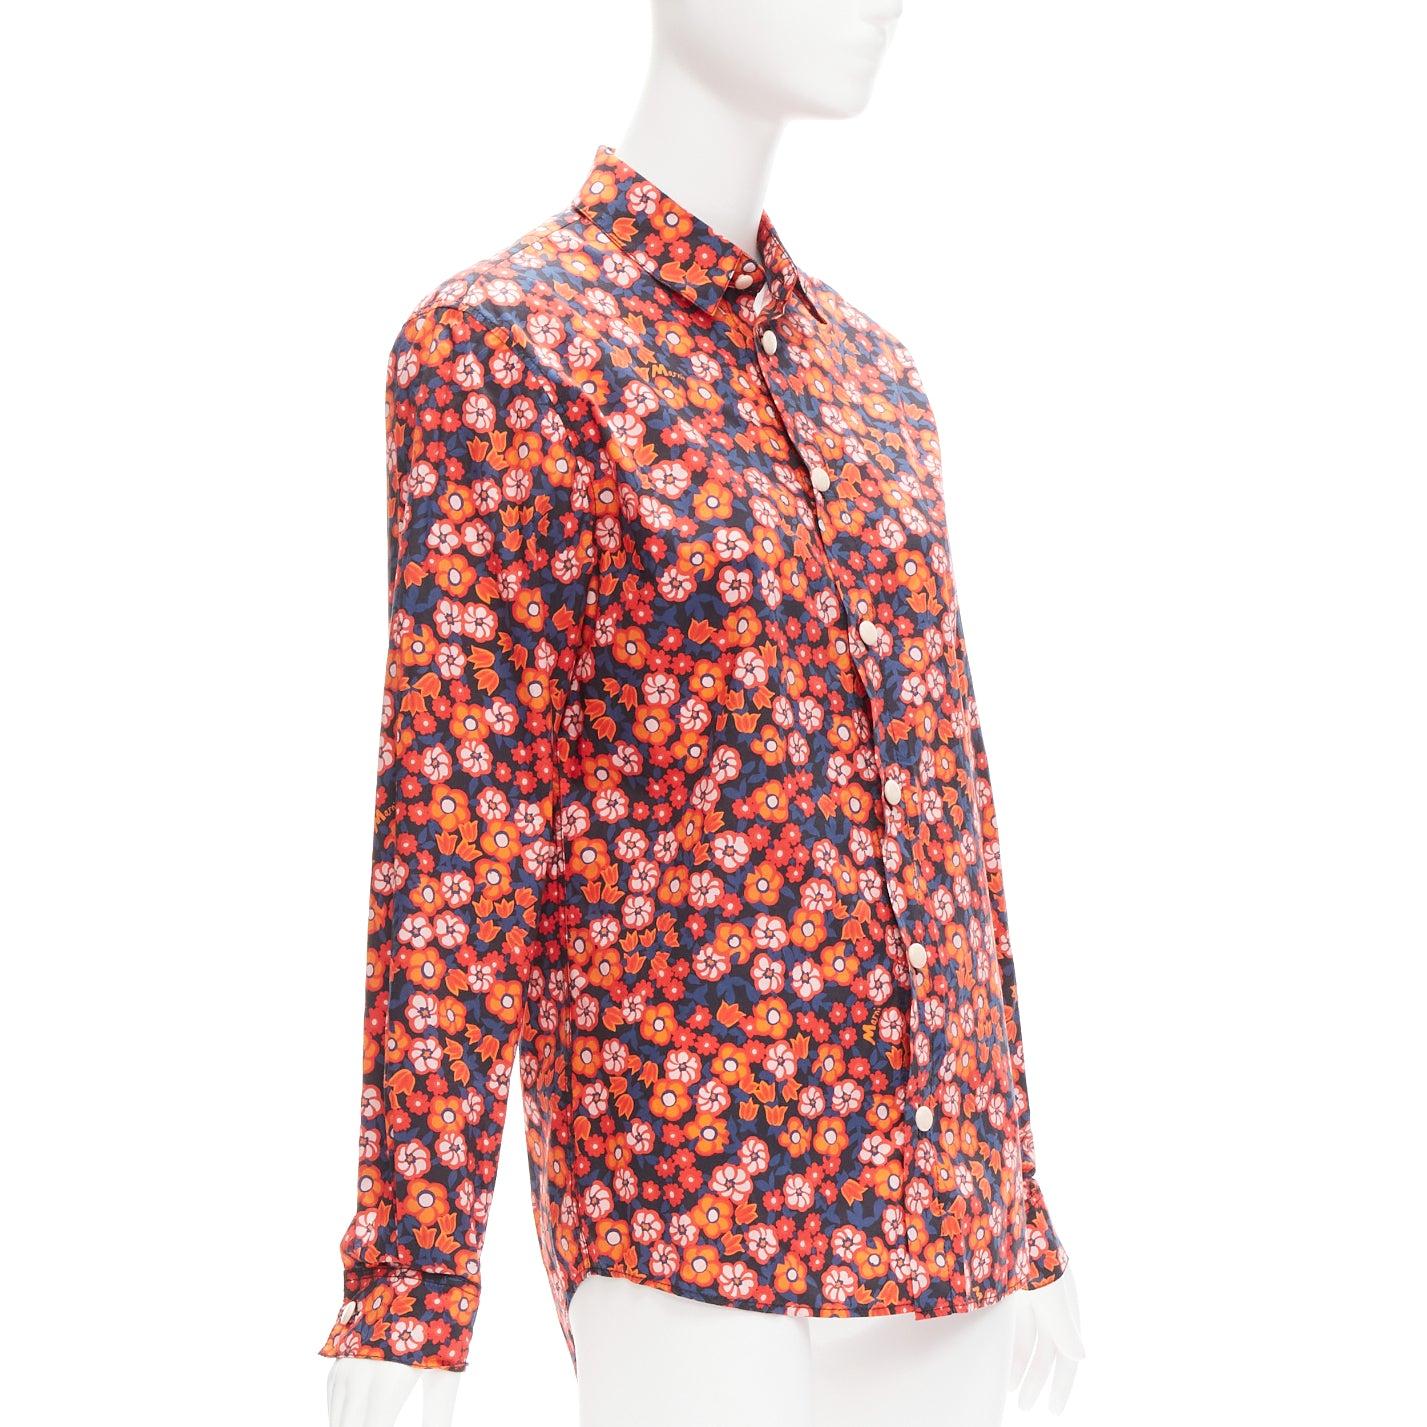 MARNI 100% cotton red blue floral print long sleeve shirt top IT38 XS
Reference: CELG/A00352
Brand: Marni
Material: Cotton
Color: Blue, Red
Pattern: Floral
Closure: Button
Extra Details: Nude plastic buttons.
Made in: Portugal

CONDITION:
Condition: